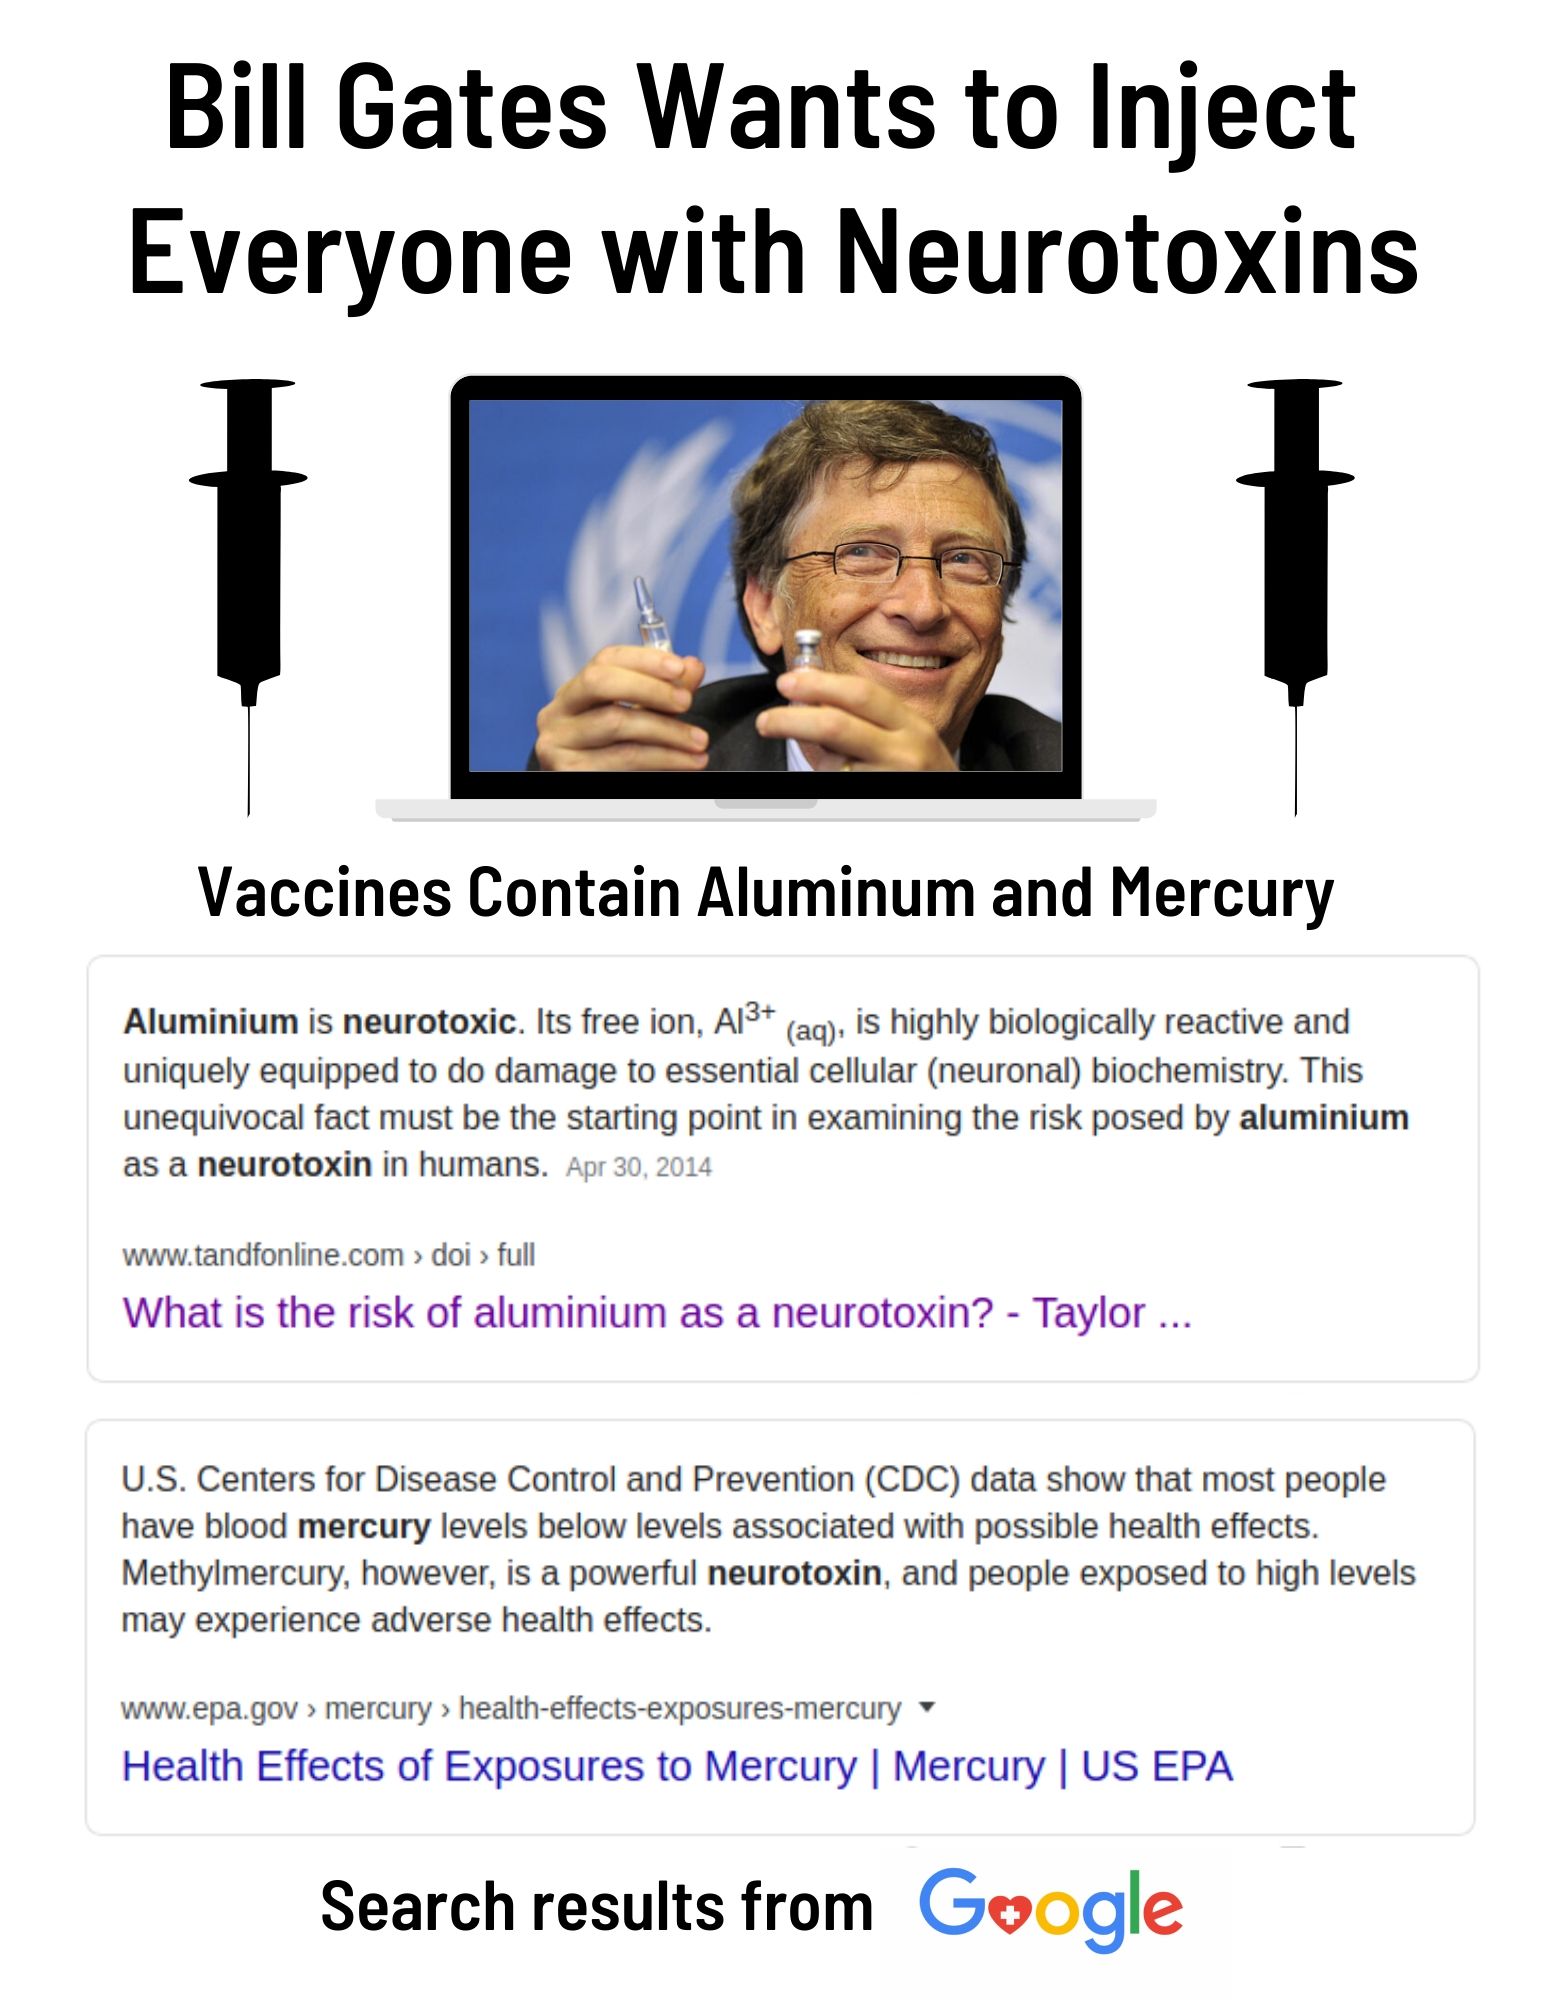 Bill-Gates-Wants-to-Inject-Everyone-with-Neurotoxins.jpg